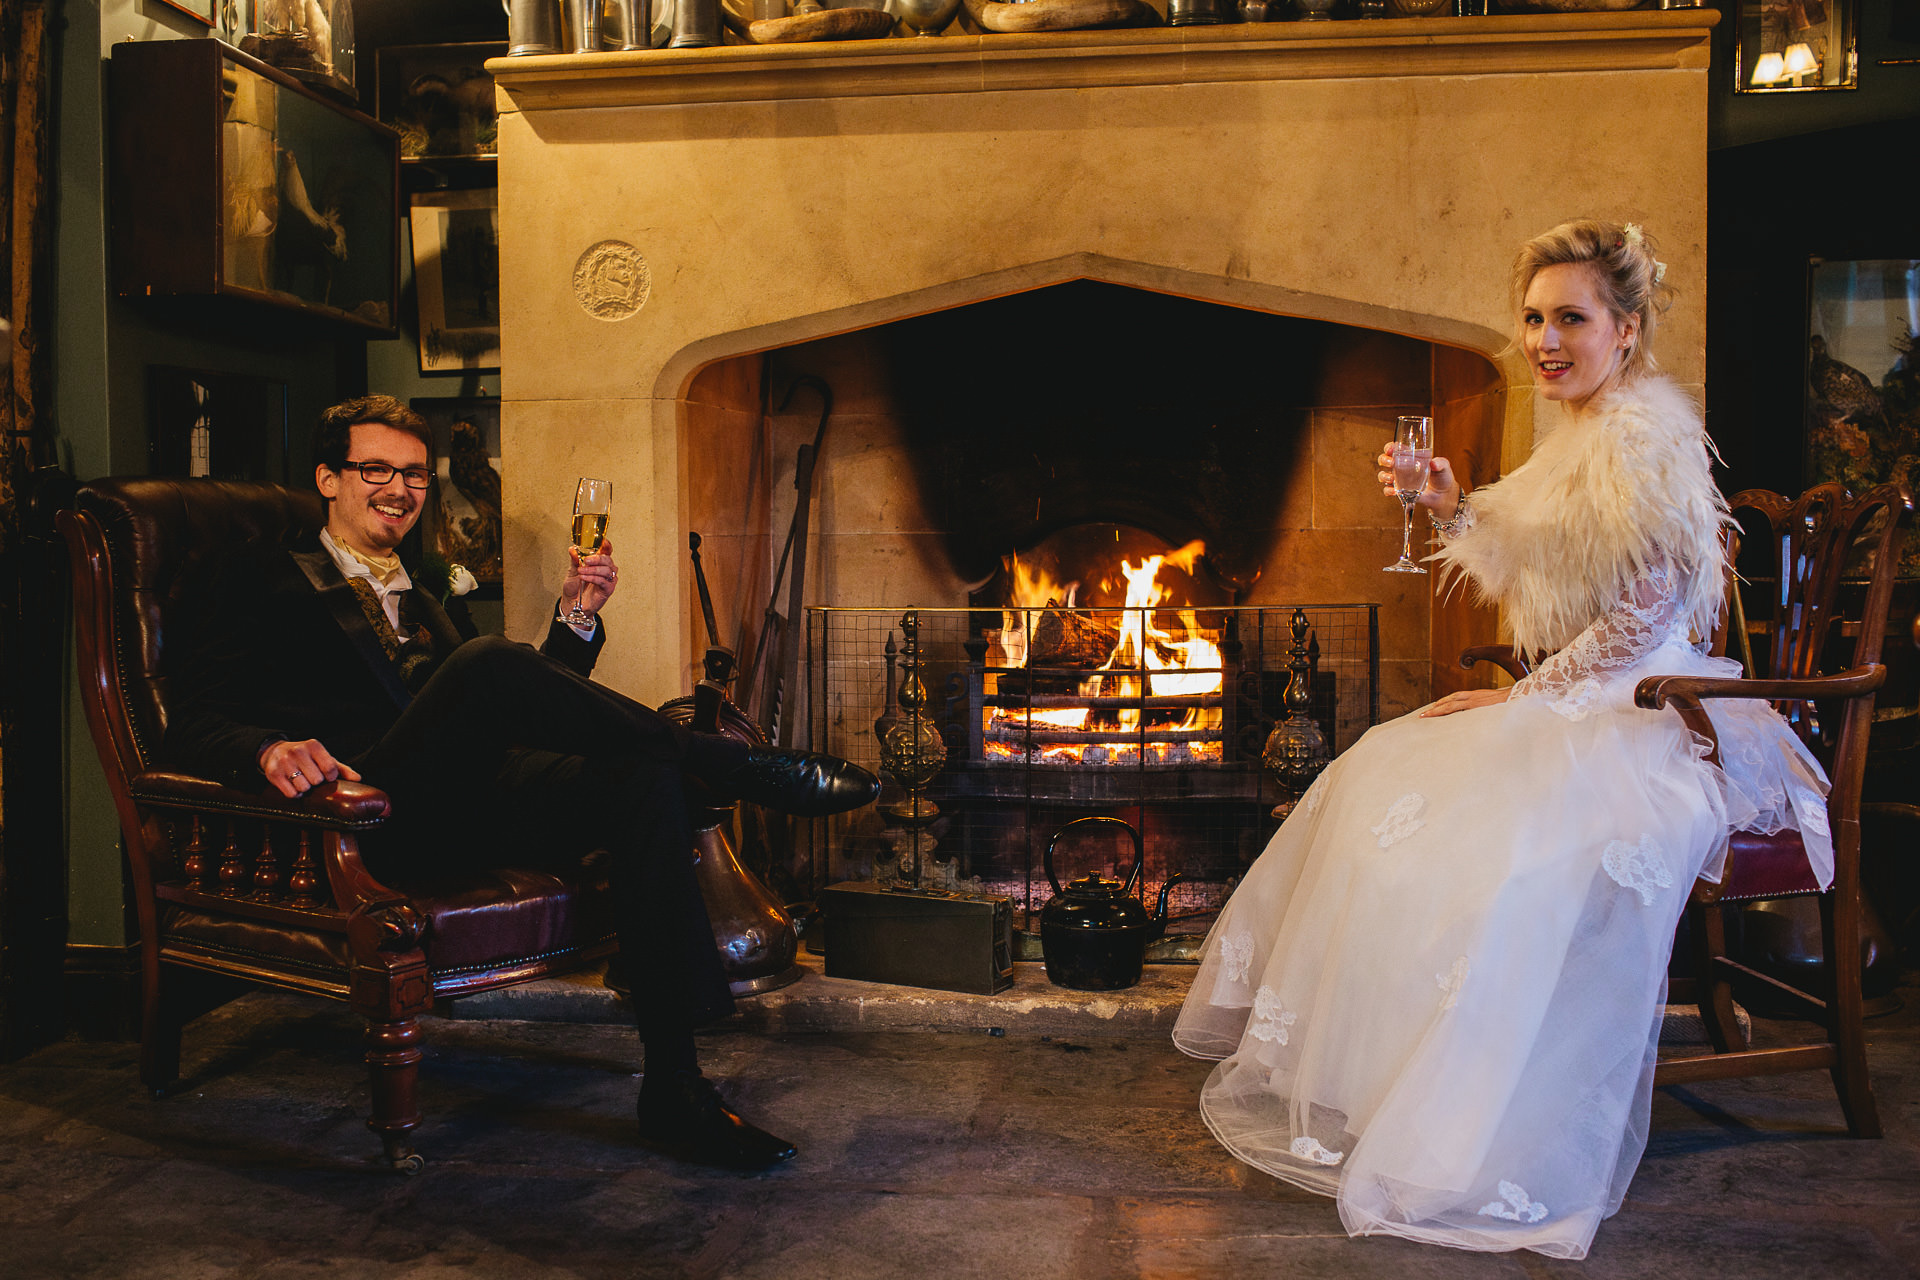 A bride and groom sitting by a log fire during their winter wedding celebration